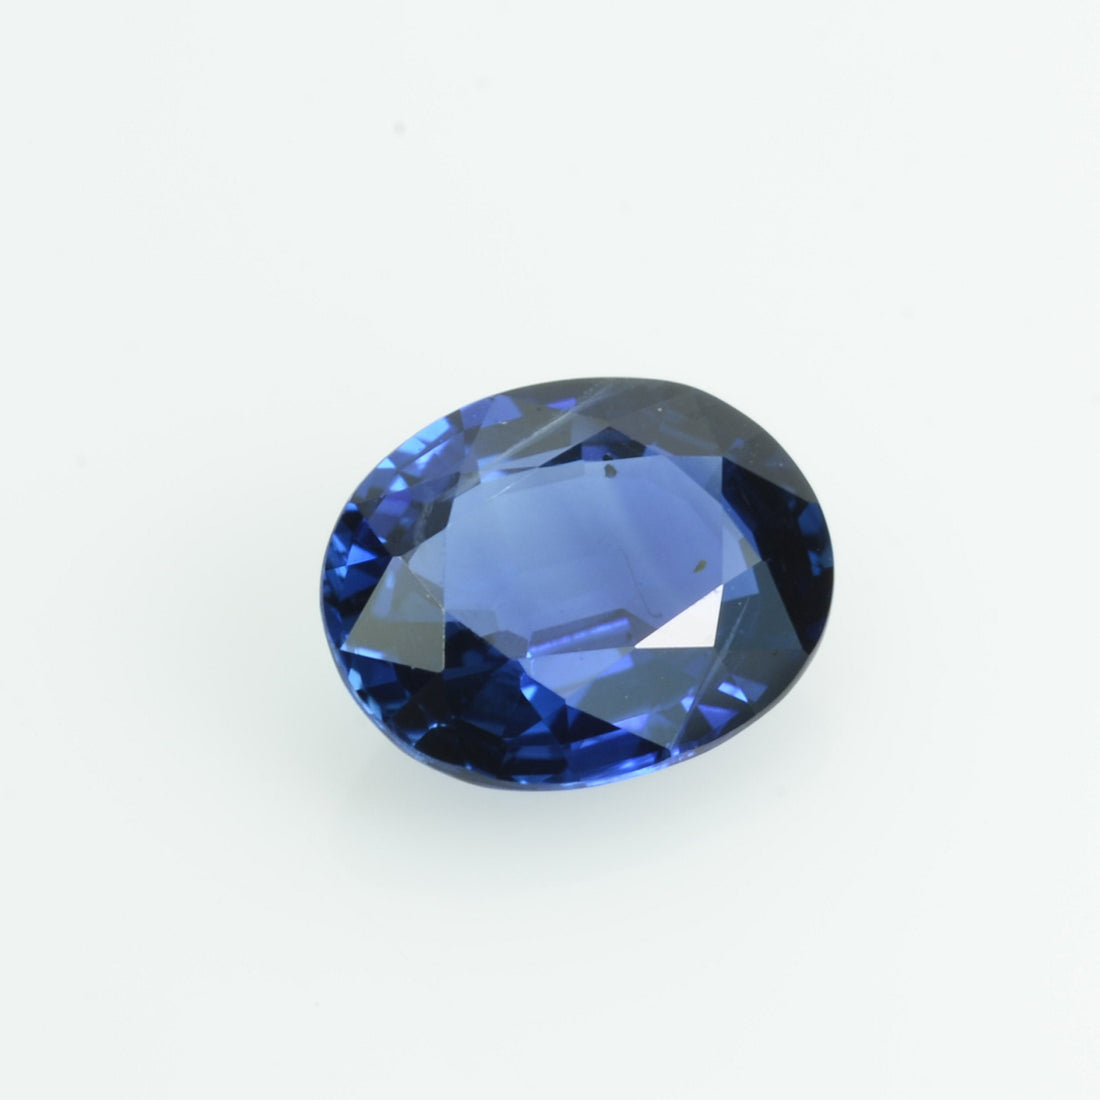 1.34 cts Natural Blue Sapphire Loose Gemstone Oval Cut